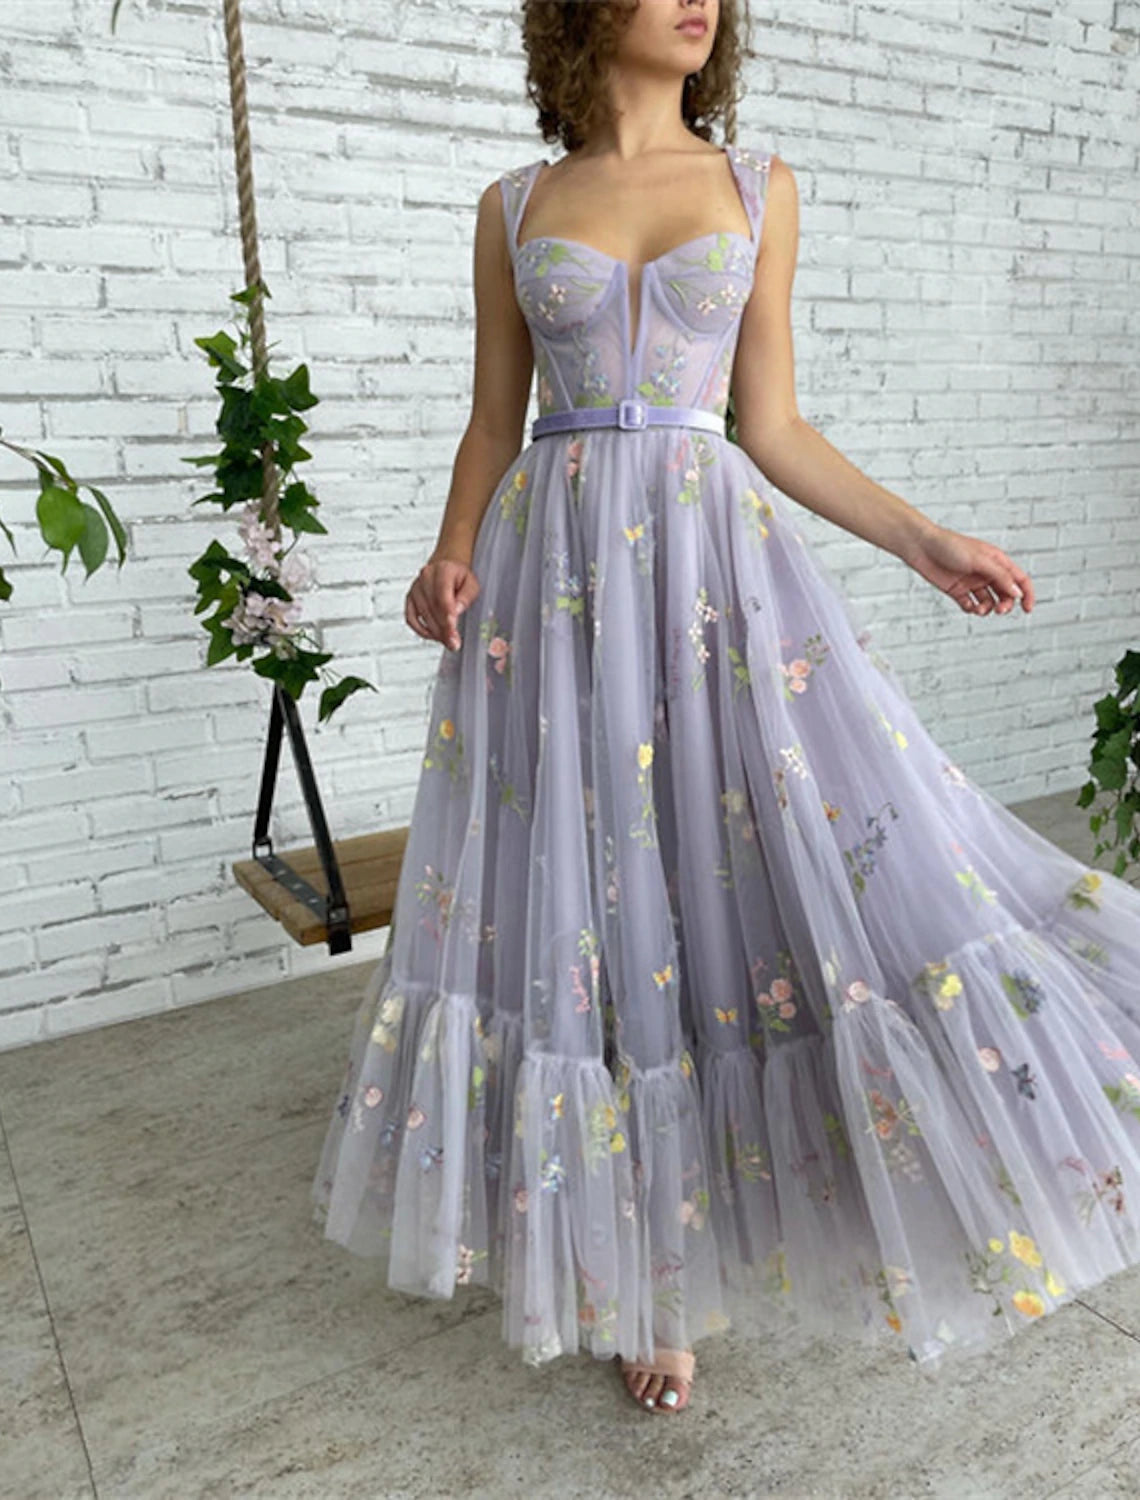 Wholesa A-Line Prom Dresses Floral Dress Formal Evening Birthday Floor Length Short Sleeve Square Neck Fall Wedding Guest Lace with Pleats Appliques